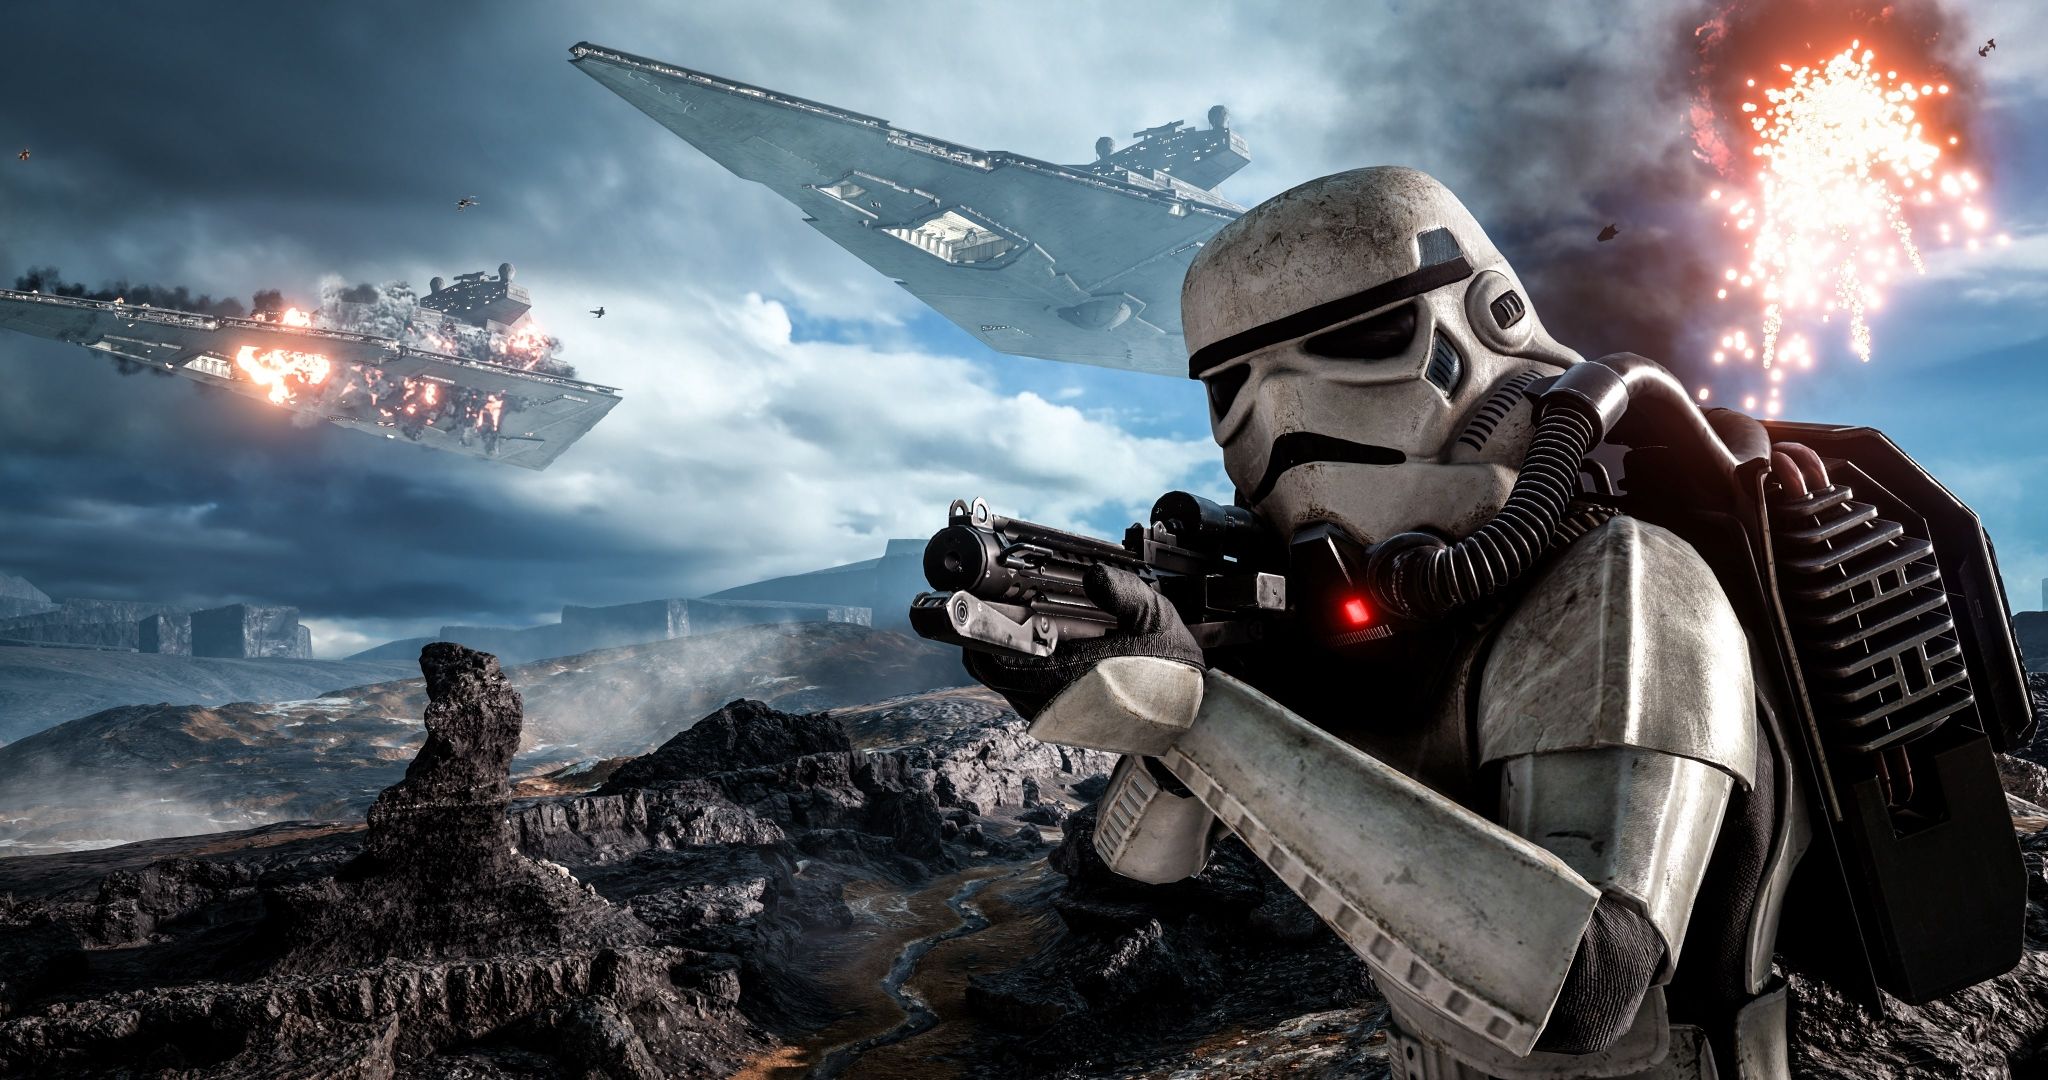 star wars wallpaper hd,action adventure game,shooter game,pc game,strategy video game,games